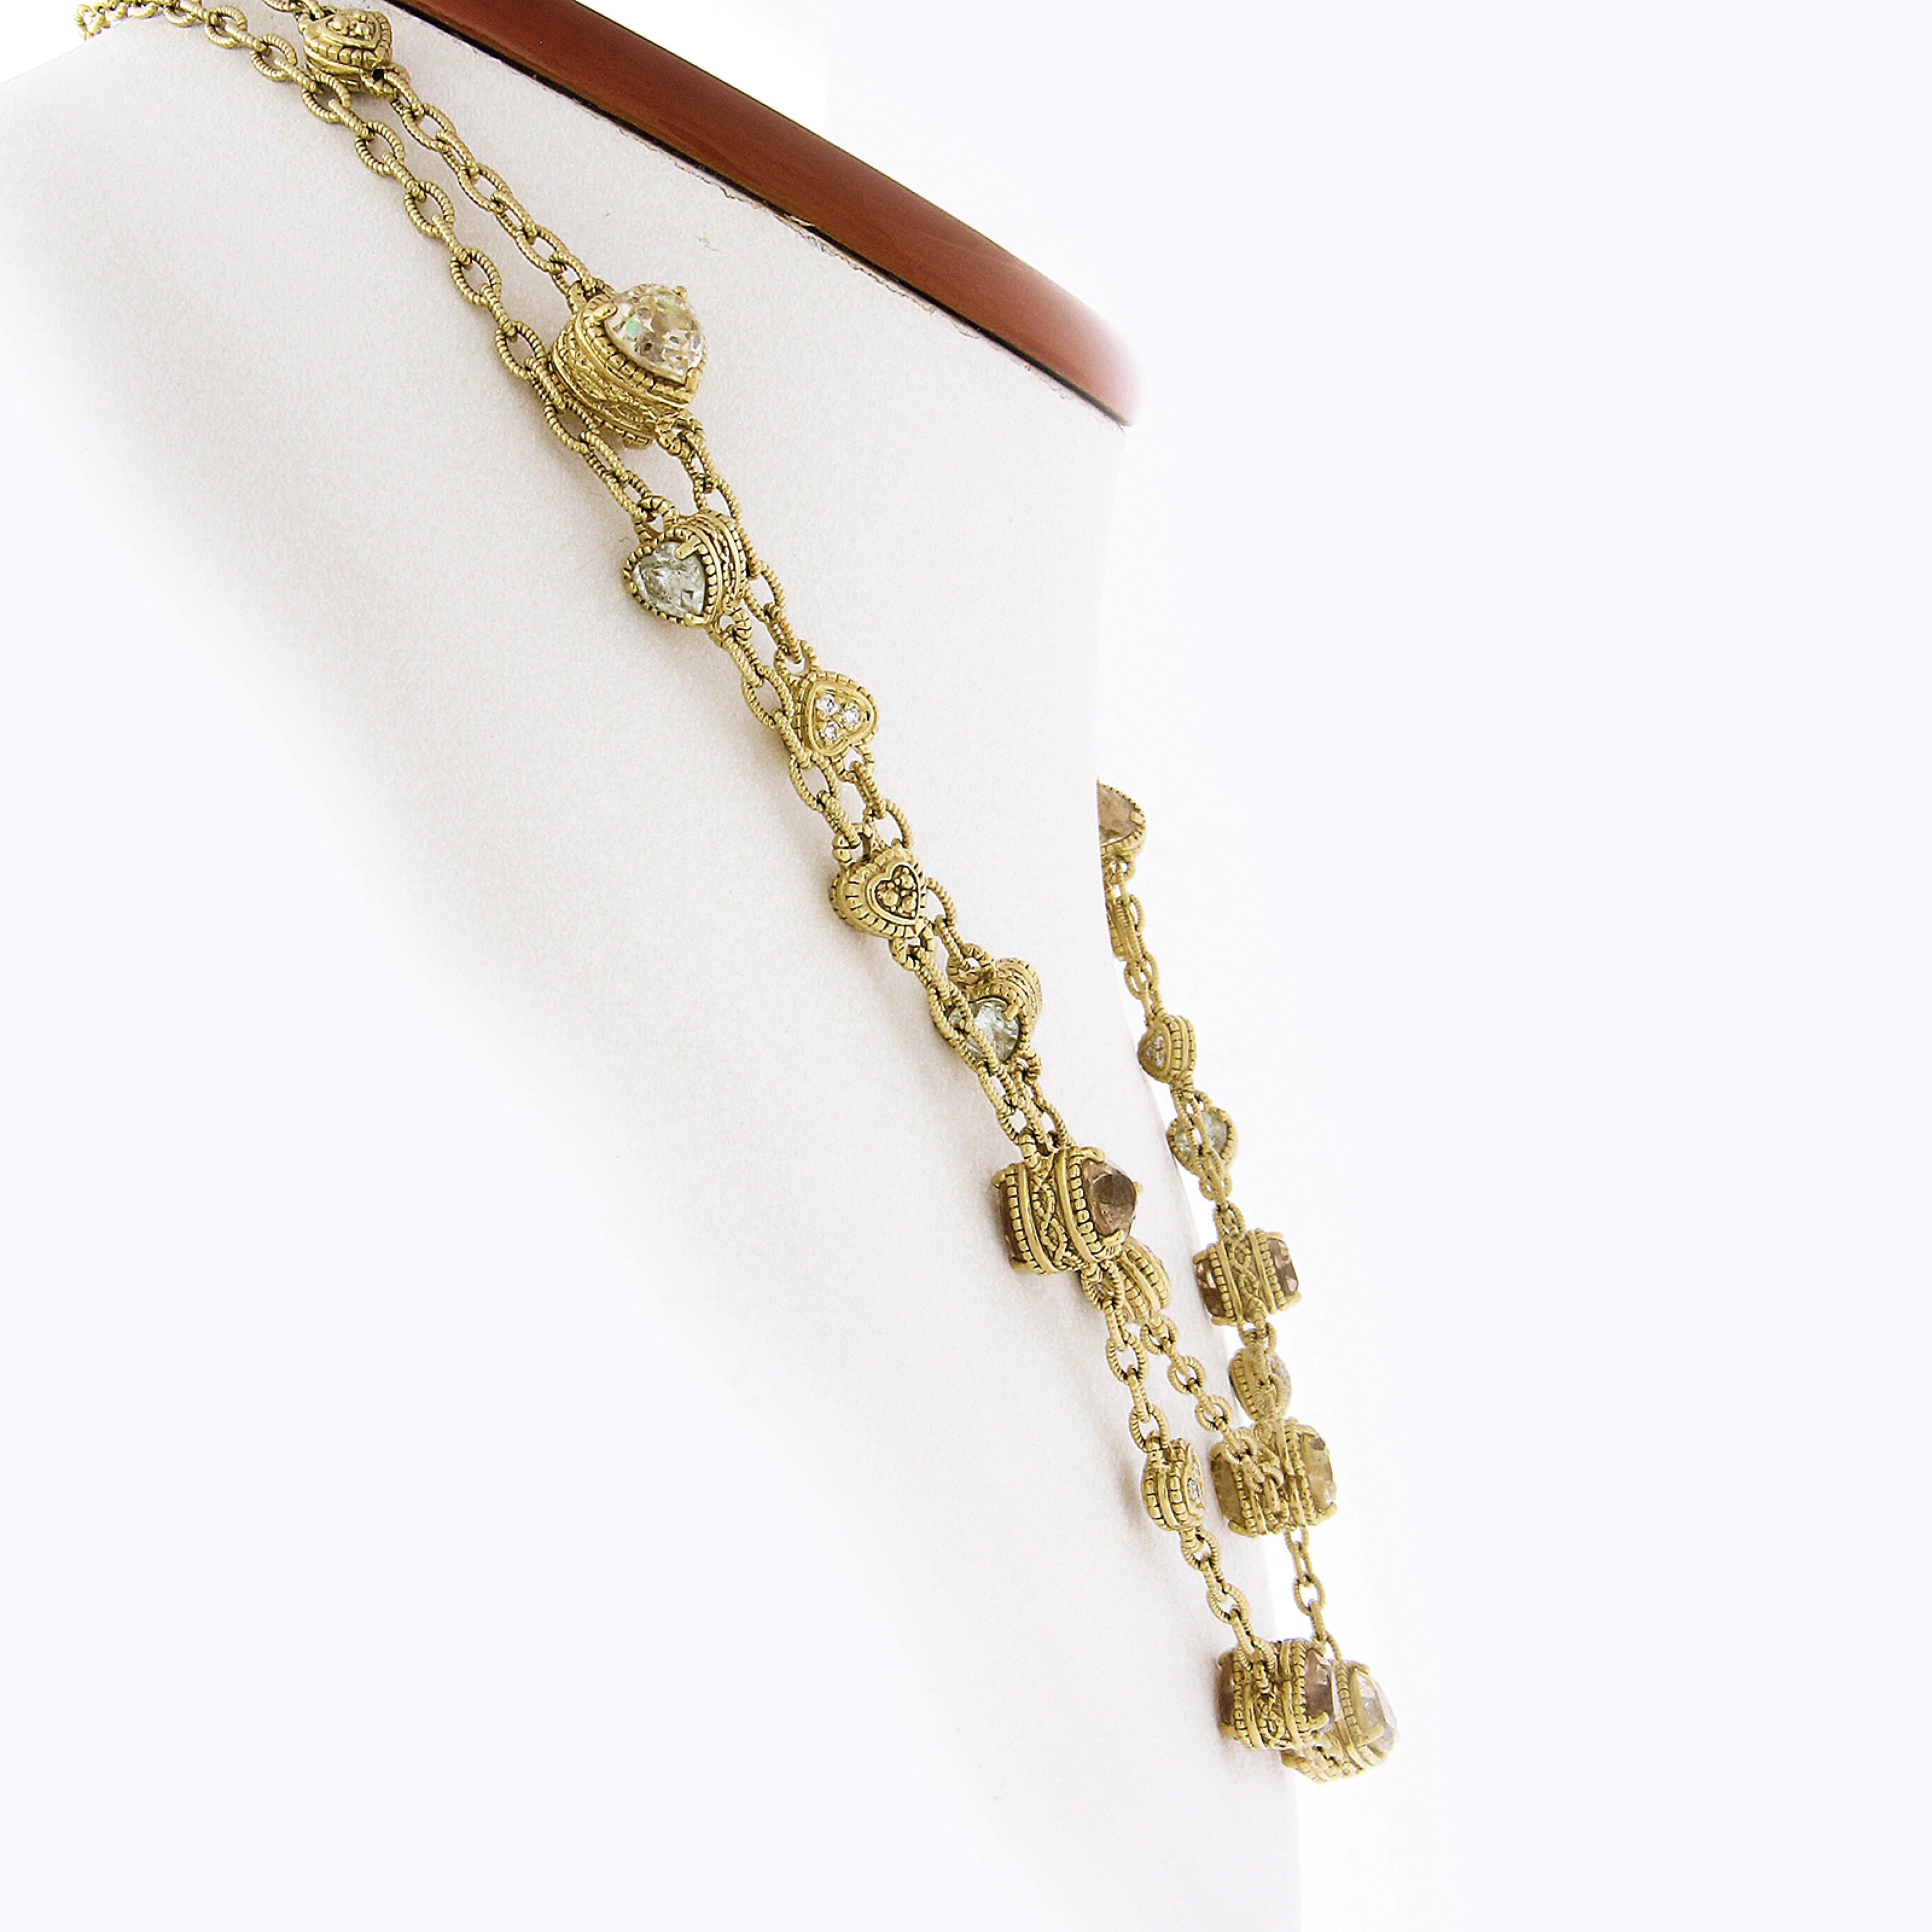 Here we have a magnificent hearts by the yard chain necklace that is designed by Judith Ripka and crafted from solid 18k yellow gold. This long and very well made piece is constructed from textured cable link with beautifully detailed, dual-sided,